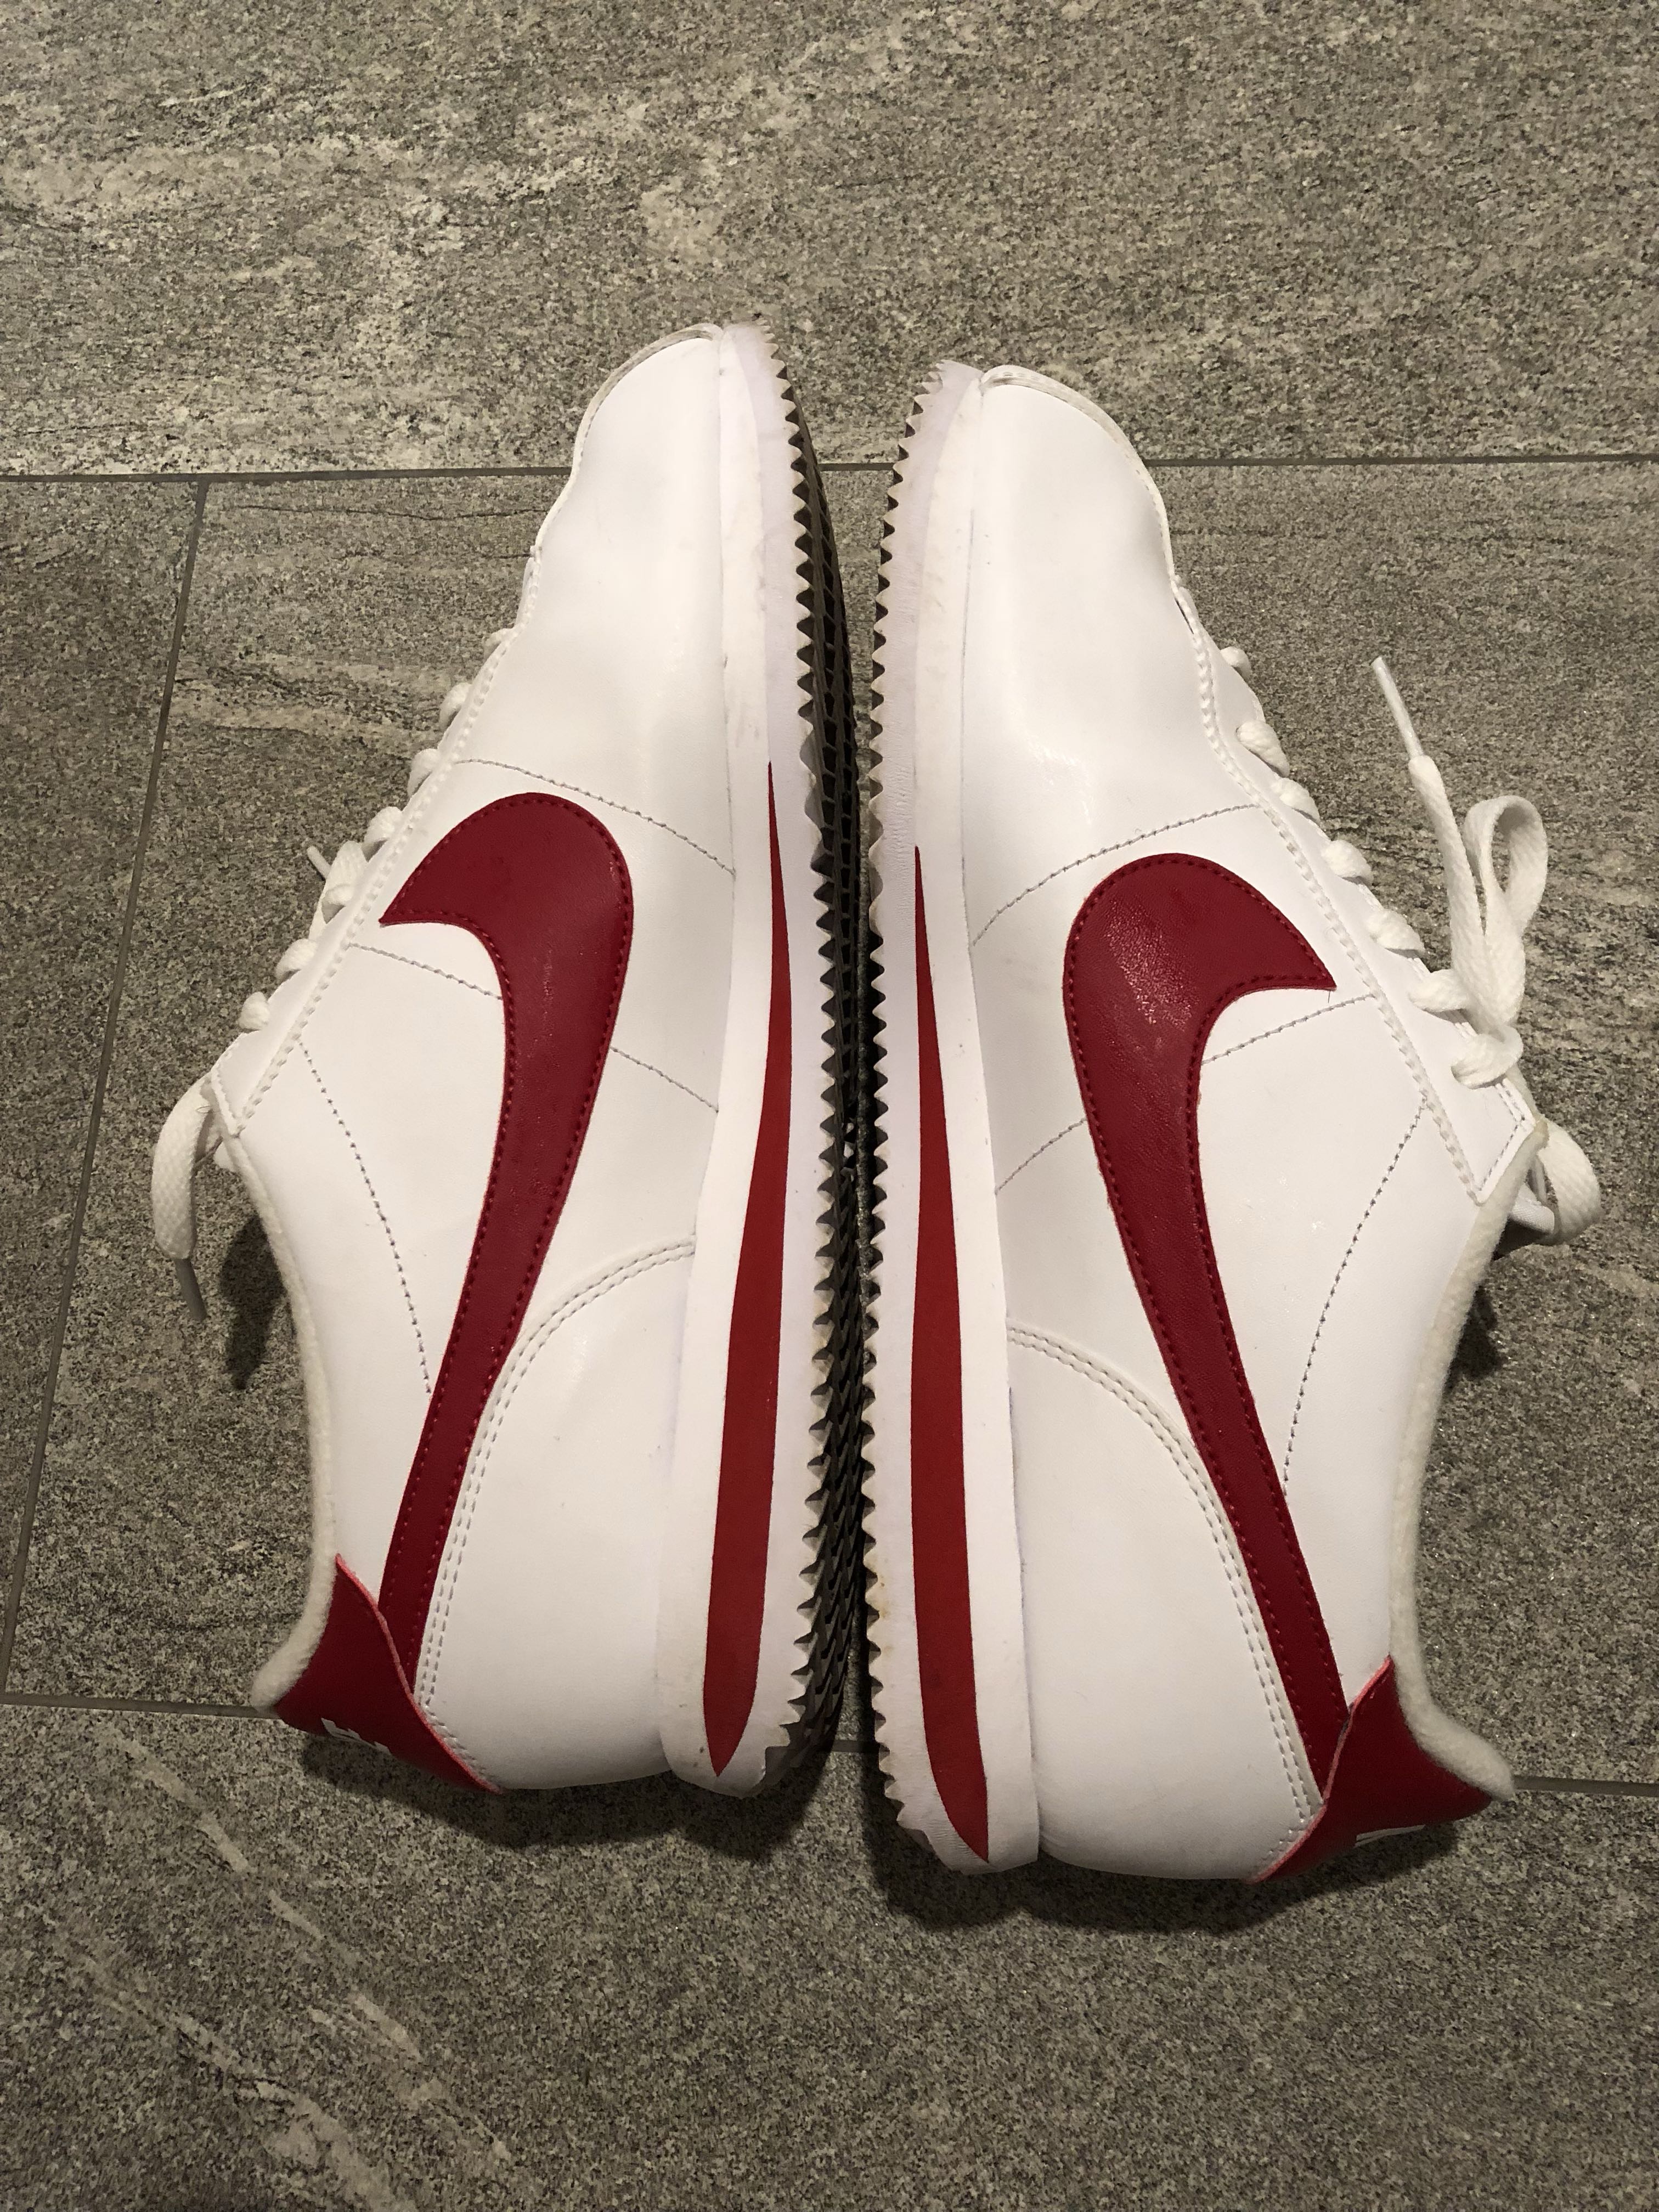 nike cortez white with red swoosh